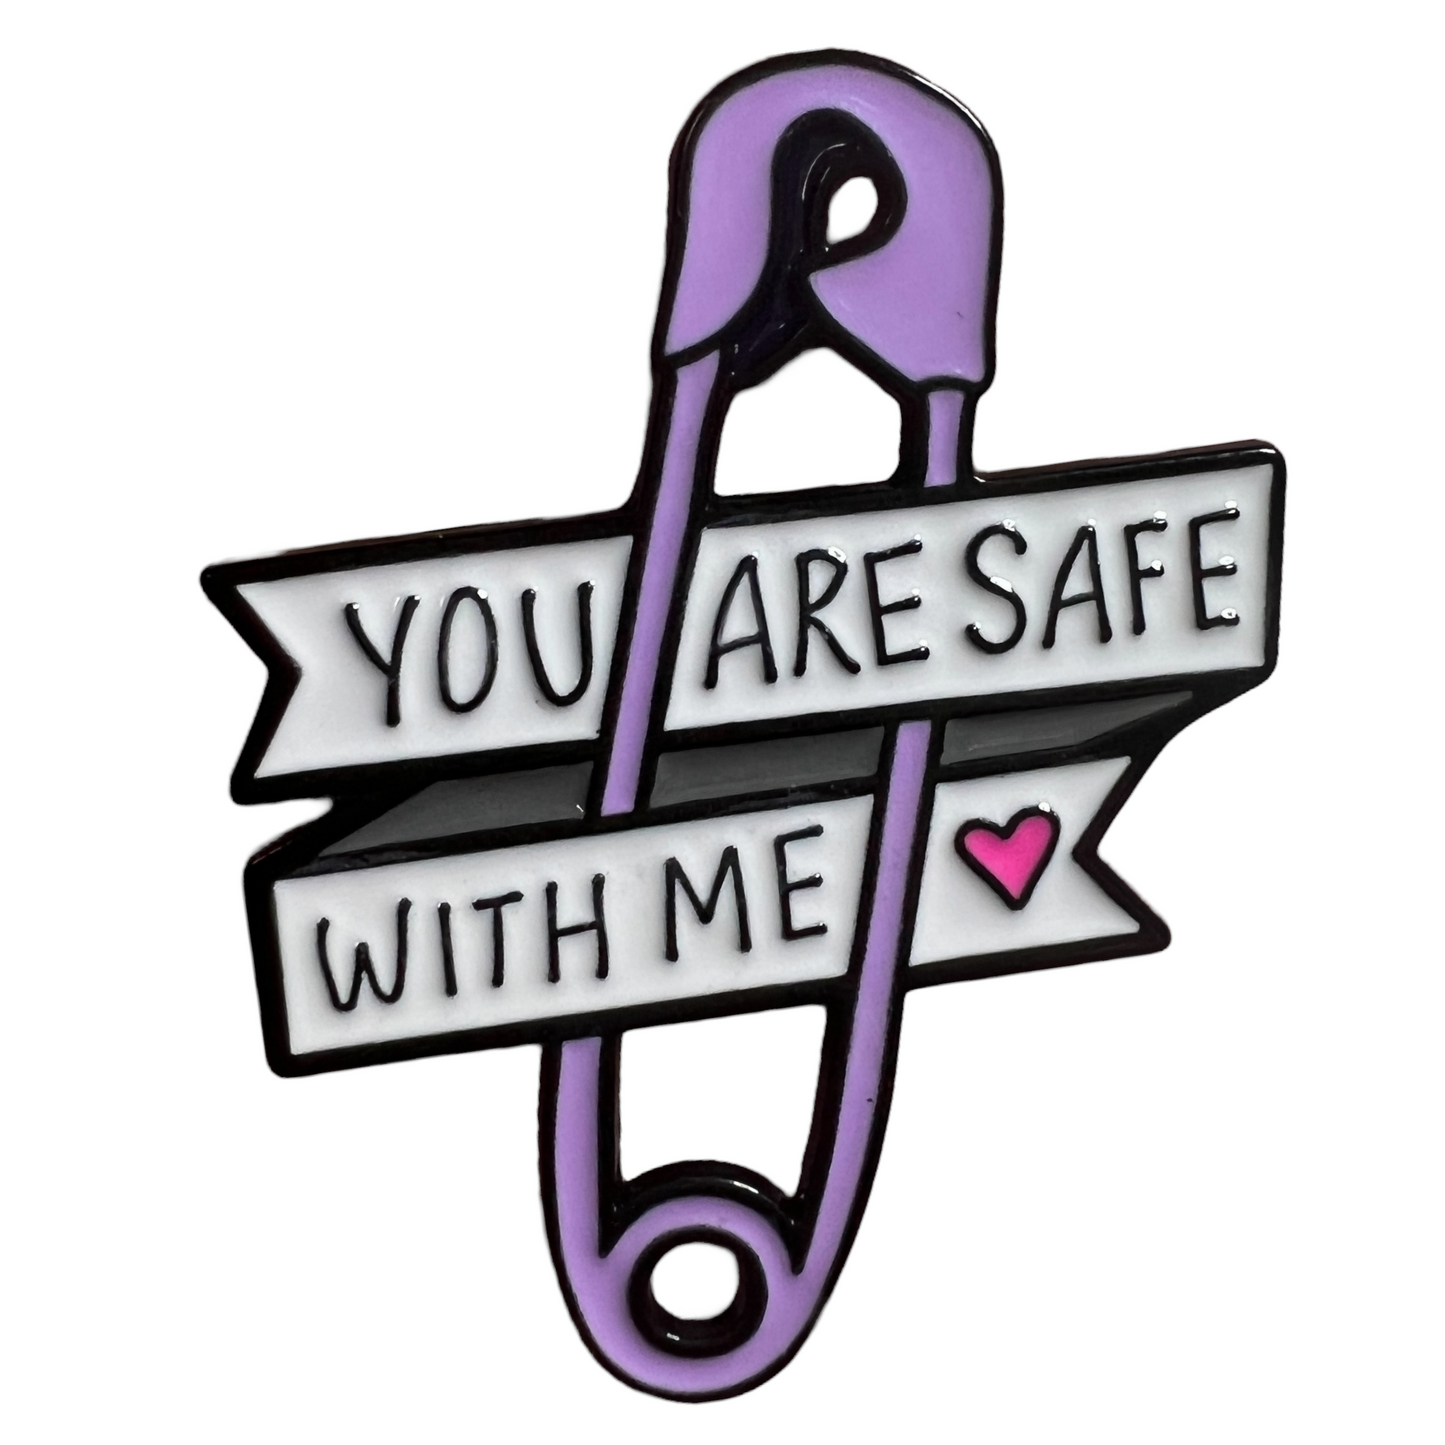 Pin — 'You Are Safe With Me'  SPIRIT SPARKPLUGS   